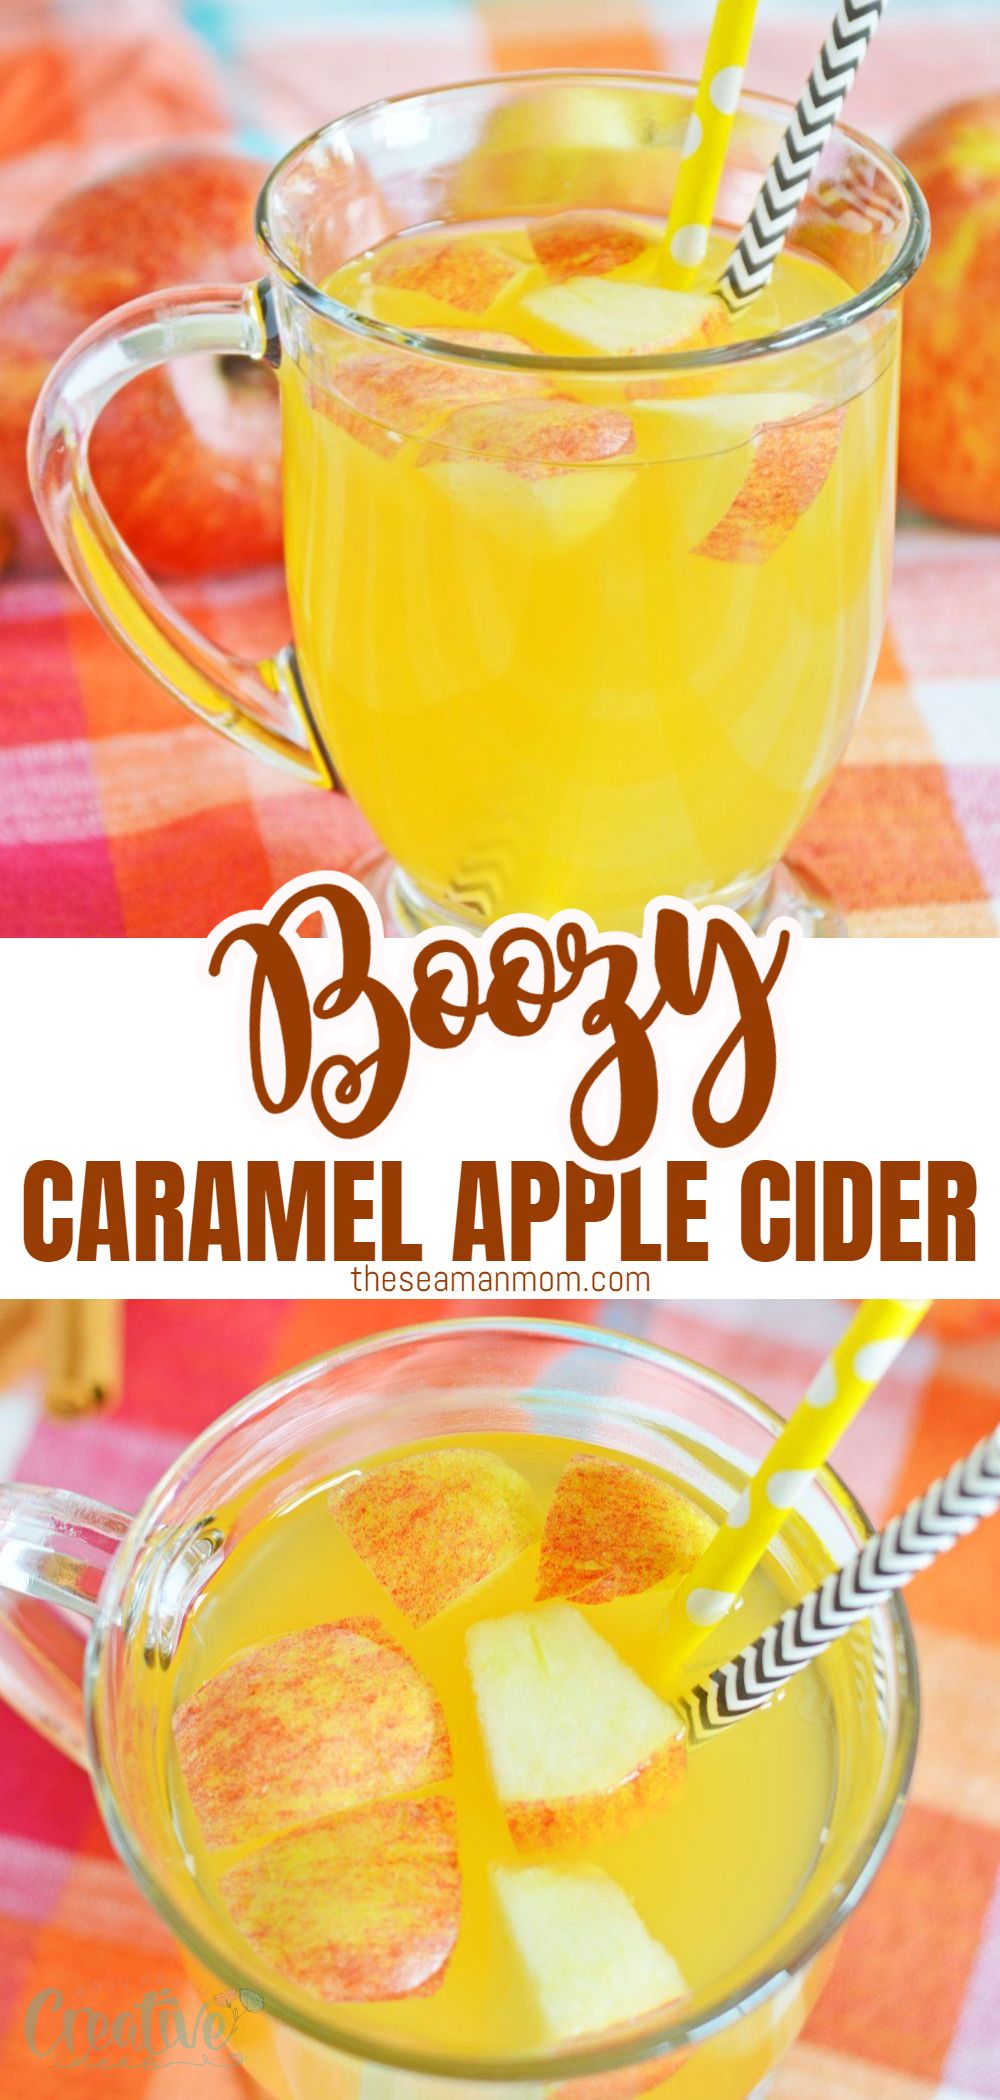 This hot spiked apple cider is a really simple recipe that will help you create the perfect warming drink for cold weather! Whether you want to enjoy this spiked apple cider after a long day, or fancy making it your signature drink the next time you host a party, get-together or dinner party this recipe is so easy to recreate at home time and time again! via @petroneagu